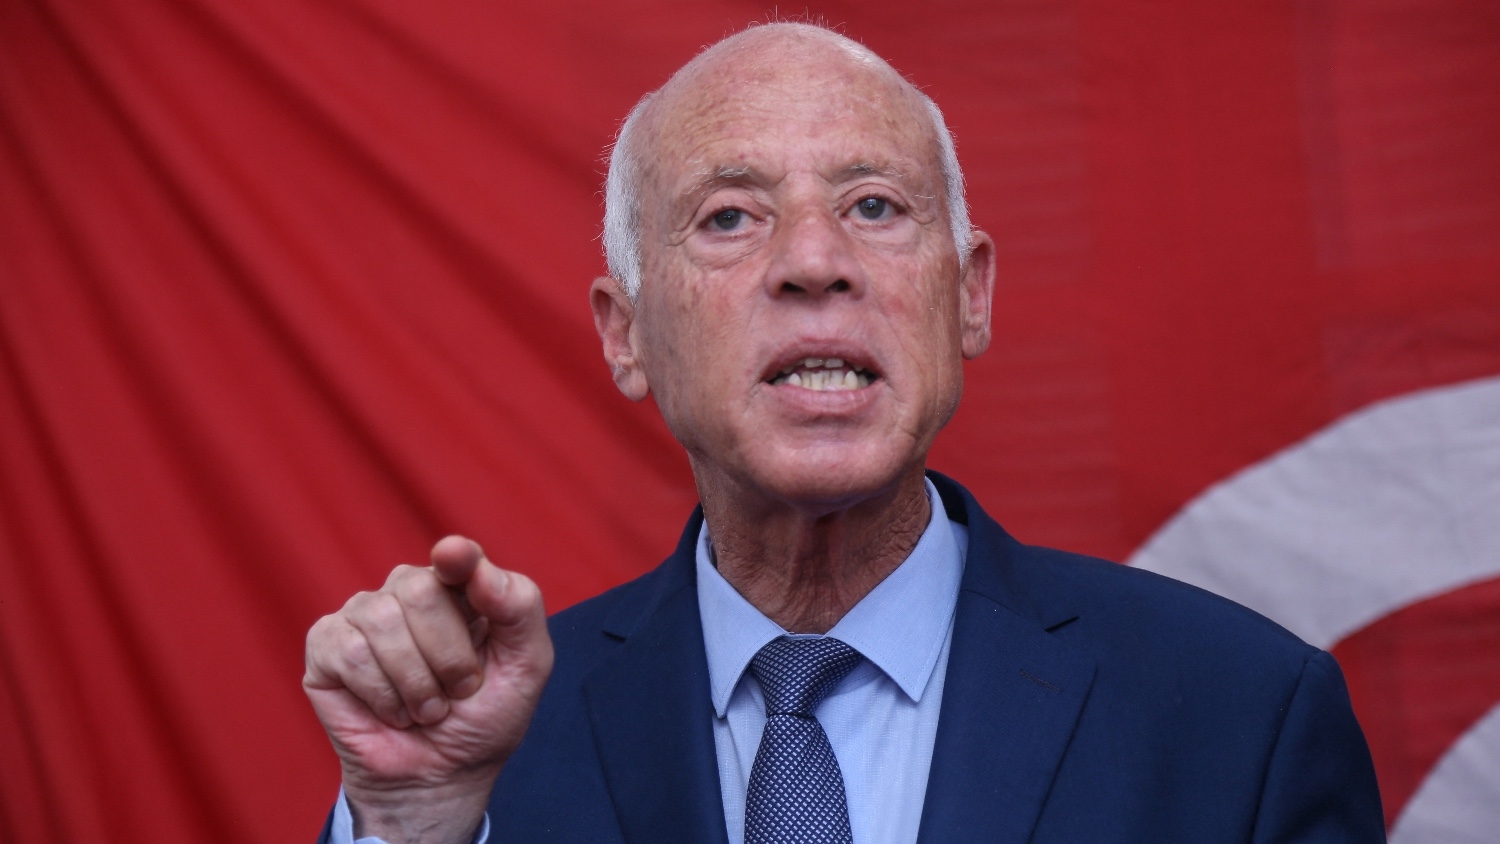 A file photo of Kais Saied during a press conference in Tunis on 17 September 2019.